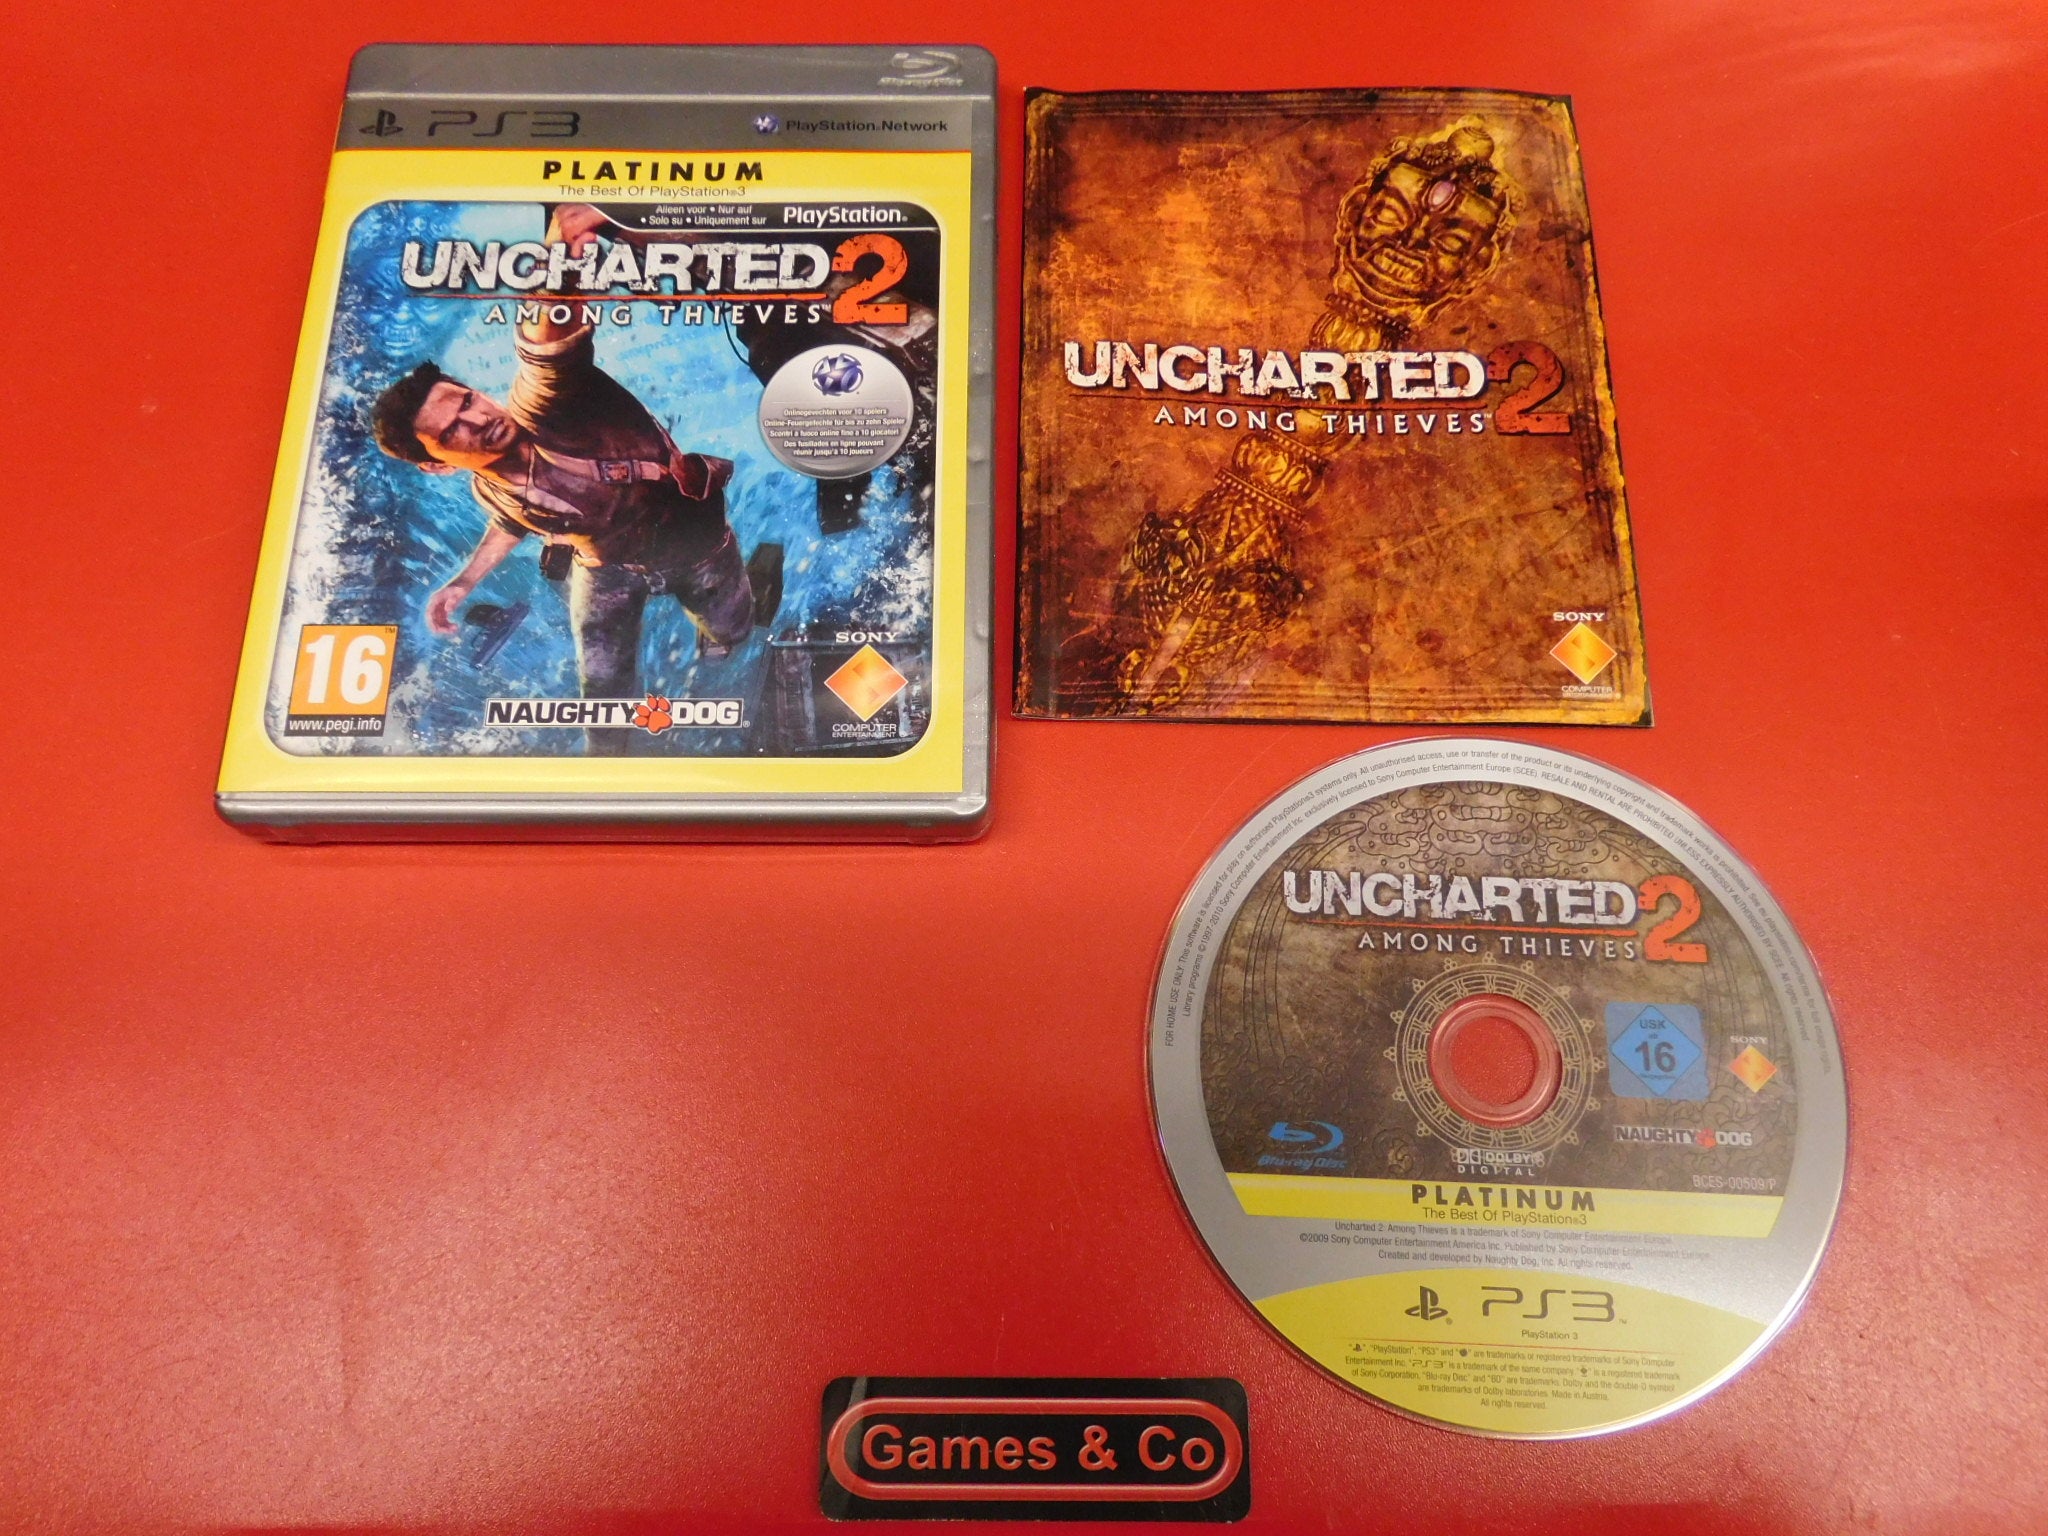 UNCHARTED 2 AMONG THIEVES